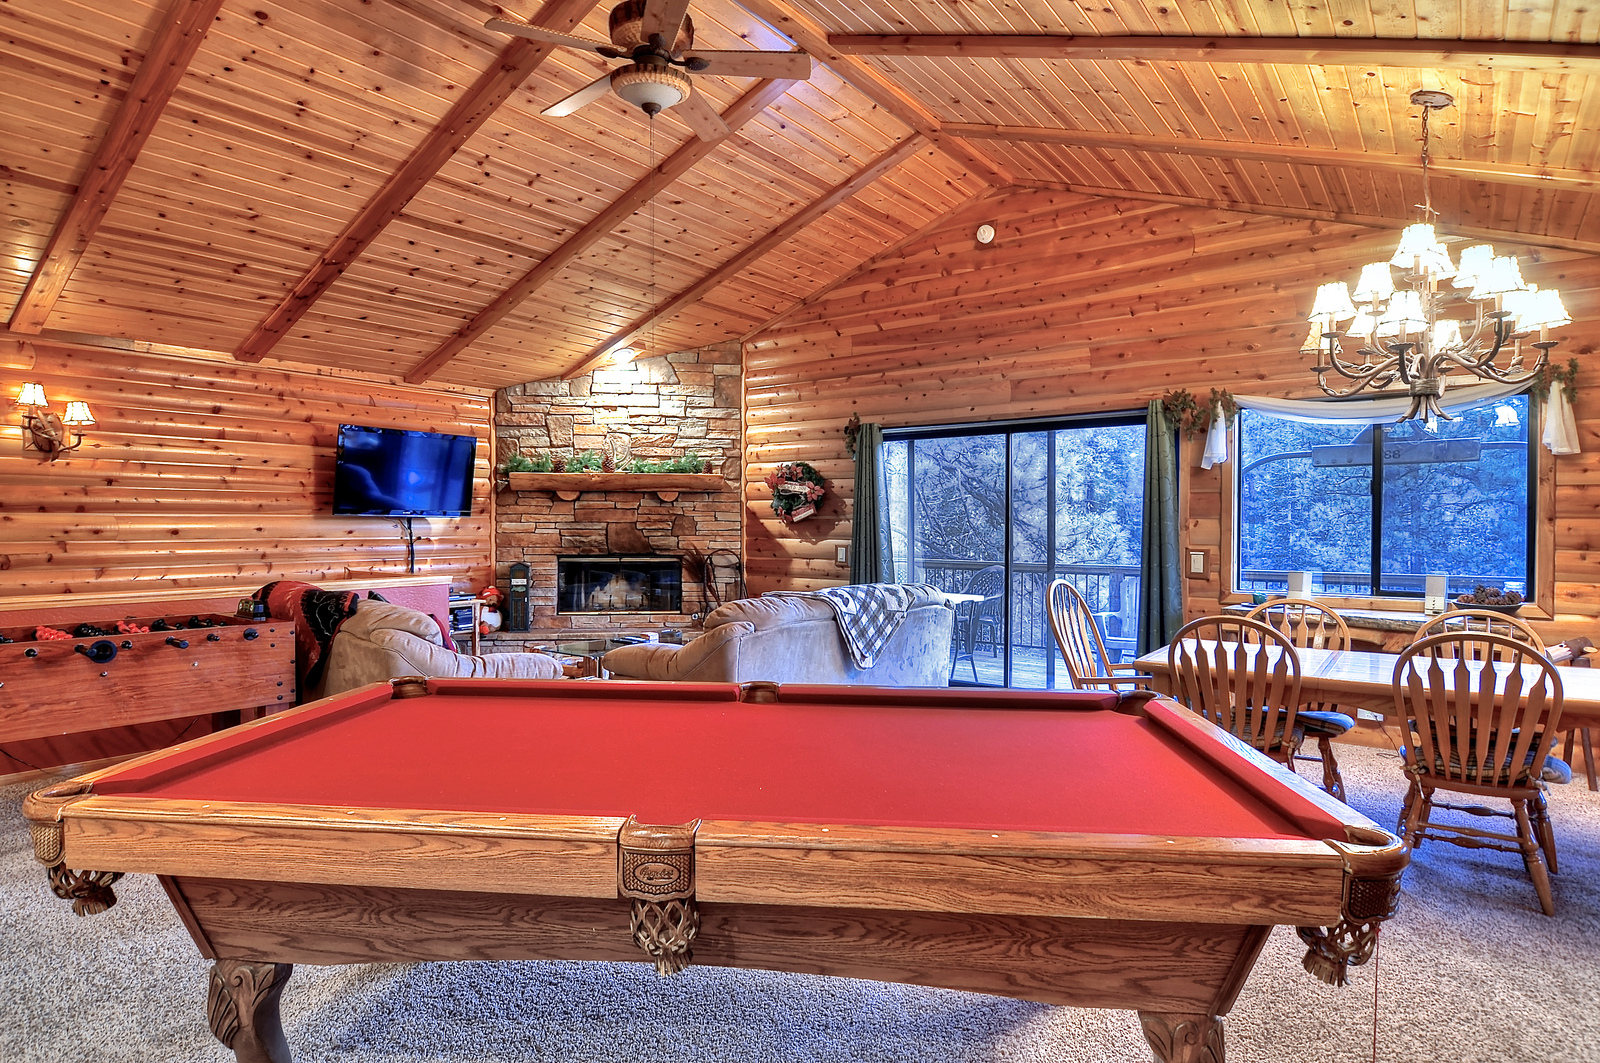 1A5762A4-155D-0010-07ADCE88424AB8C0-743 Butte-01-Living Room-Pool Table.jpg